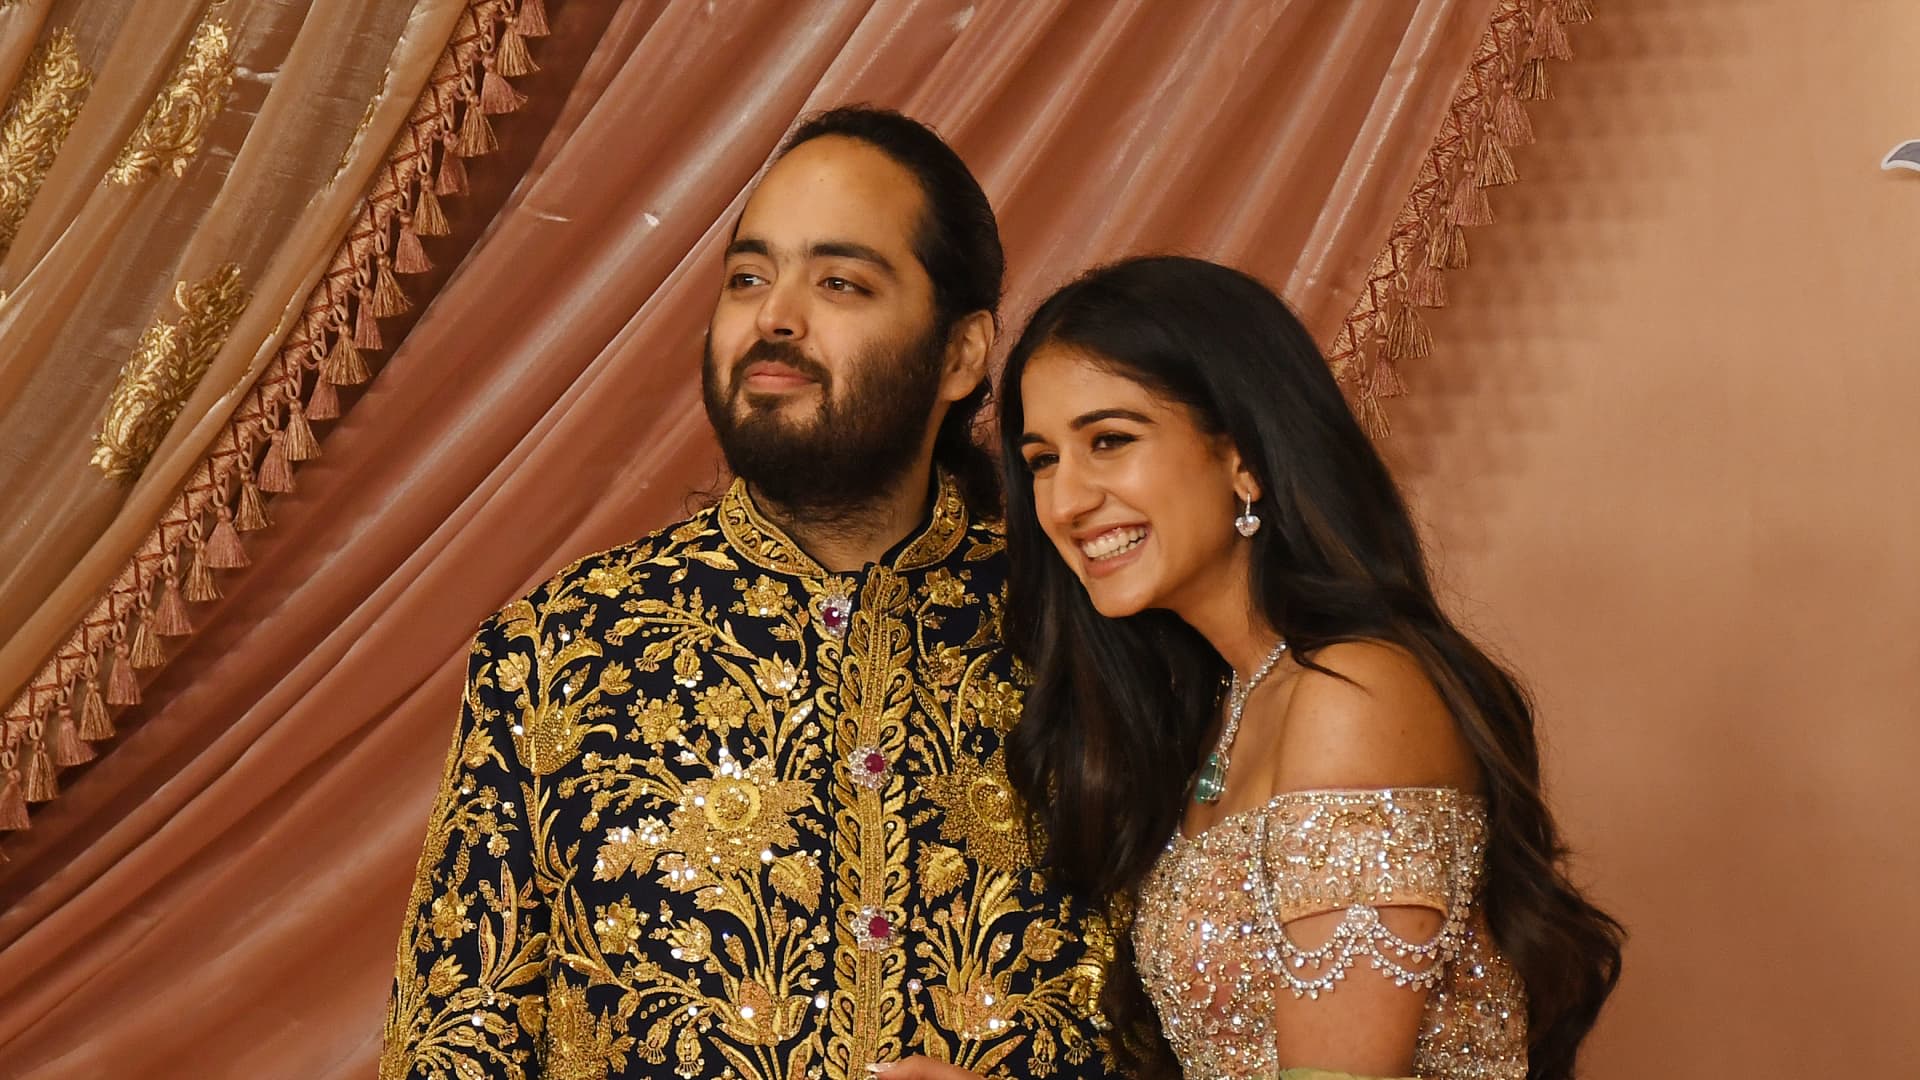 Ambani's wedding kicks off in India this weekend. Here's who will be at the star-studded event